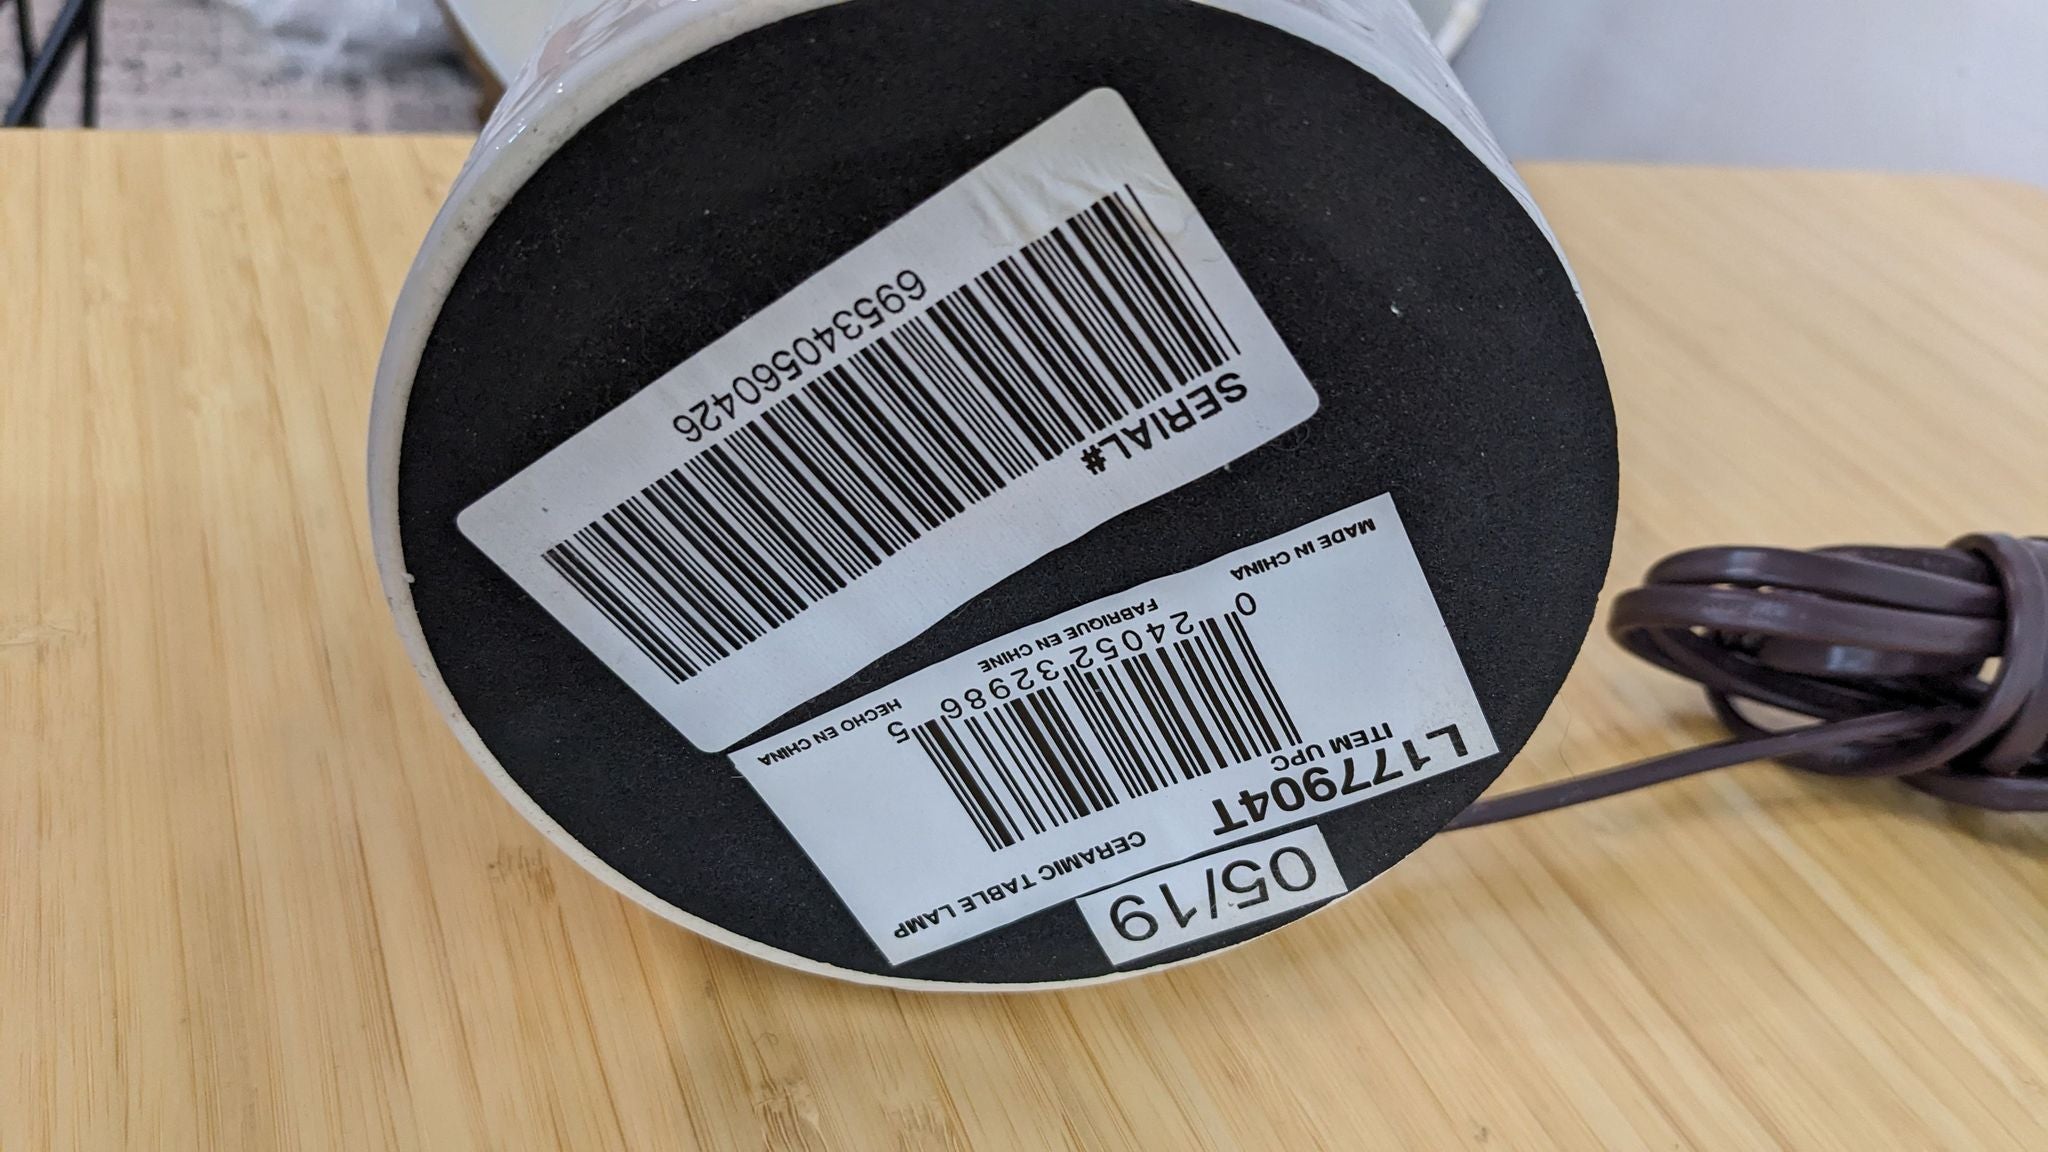 (Note: The third image appears to be a barcode label and typically would not be described as part of the product for alt text, as it does not visually represent the product itself. If a description for this image is necessary for completion of your request, please let me know!)